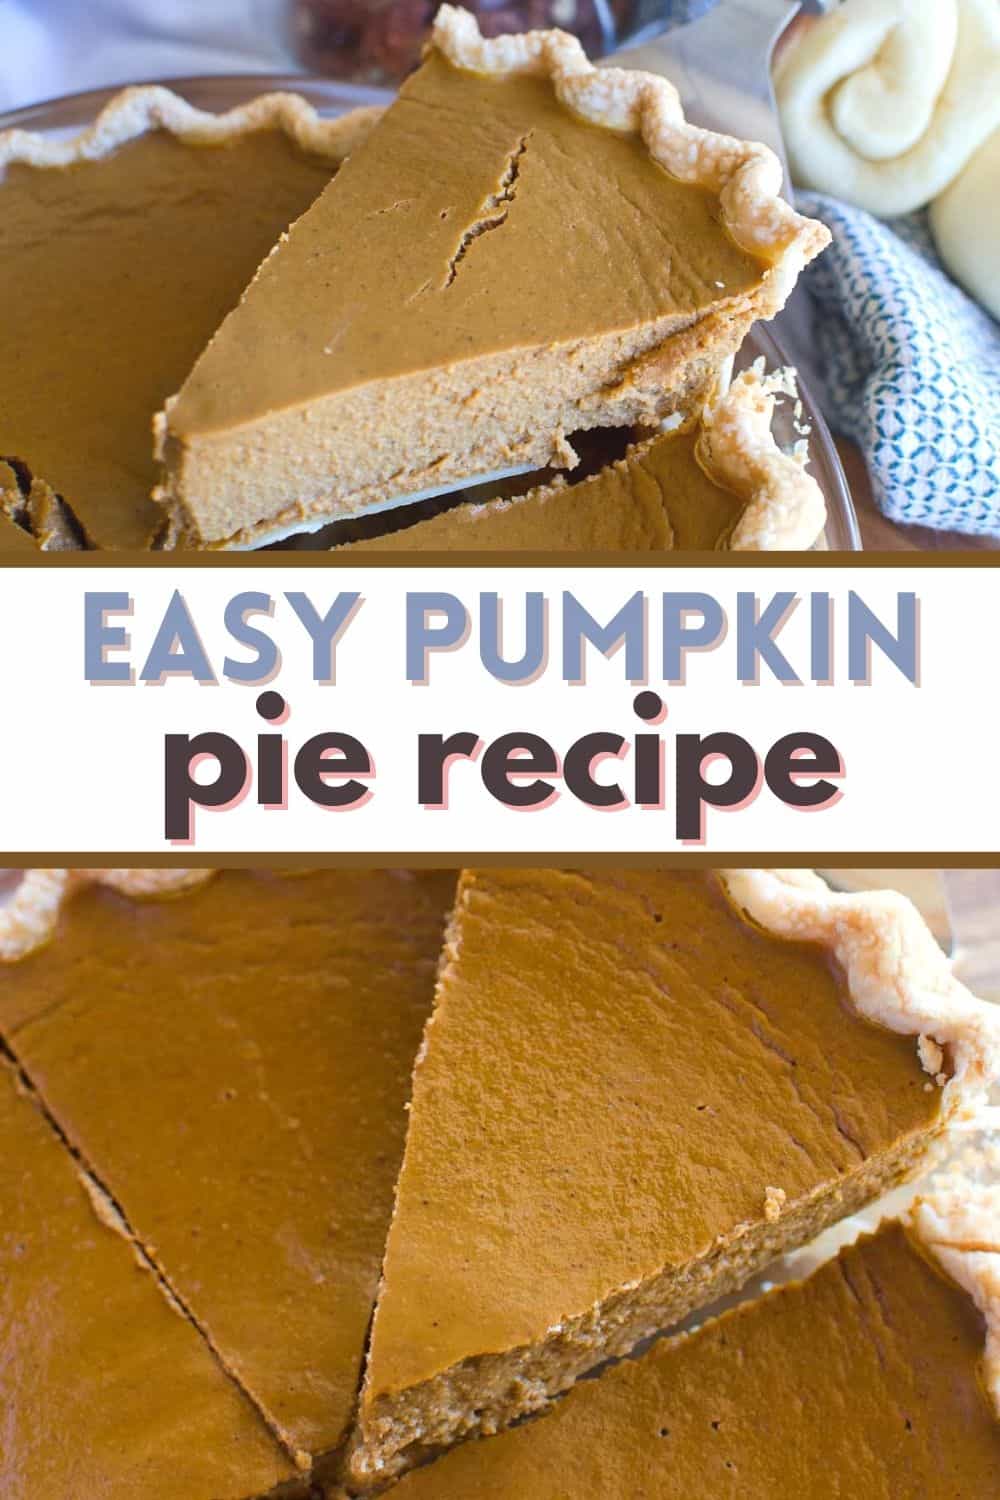 This easy pumpkin pie recipe is better than Libby's pumpkin pie!  No need to pre-bake the refrigerated pie crust, which means this pie comes together very quickly.